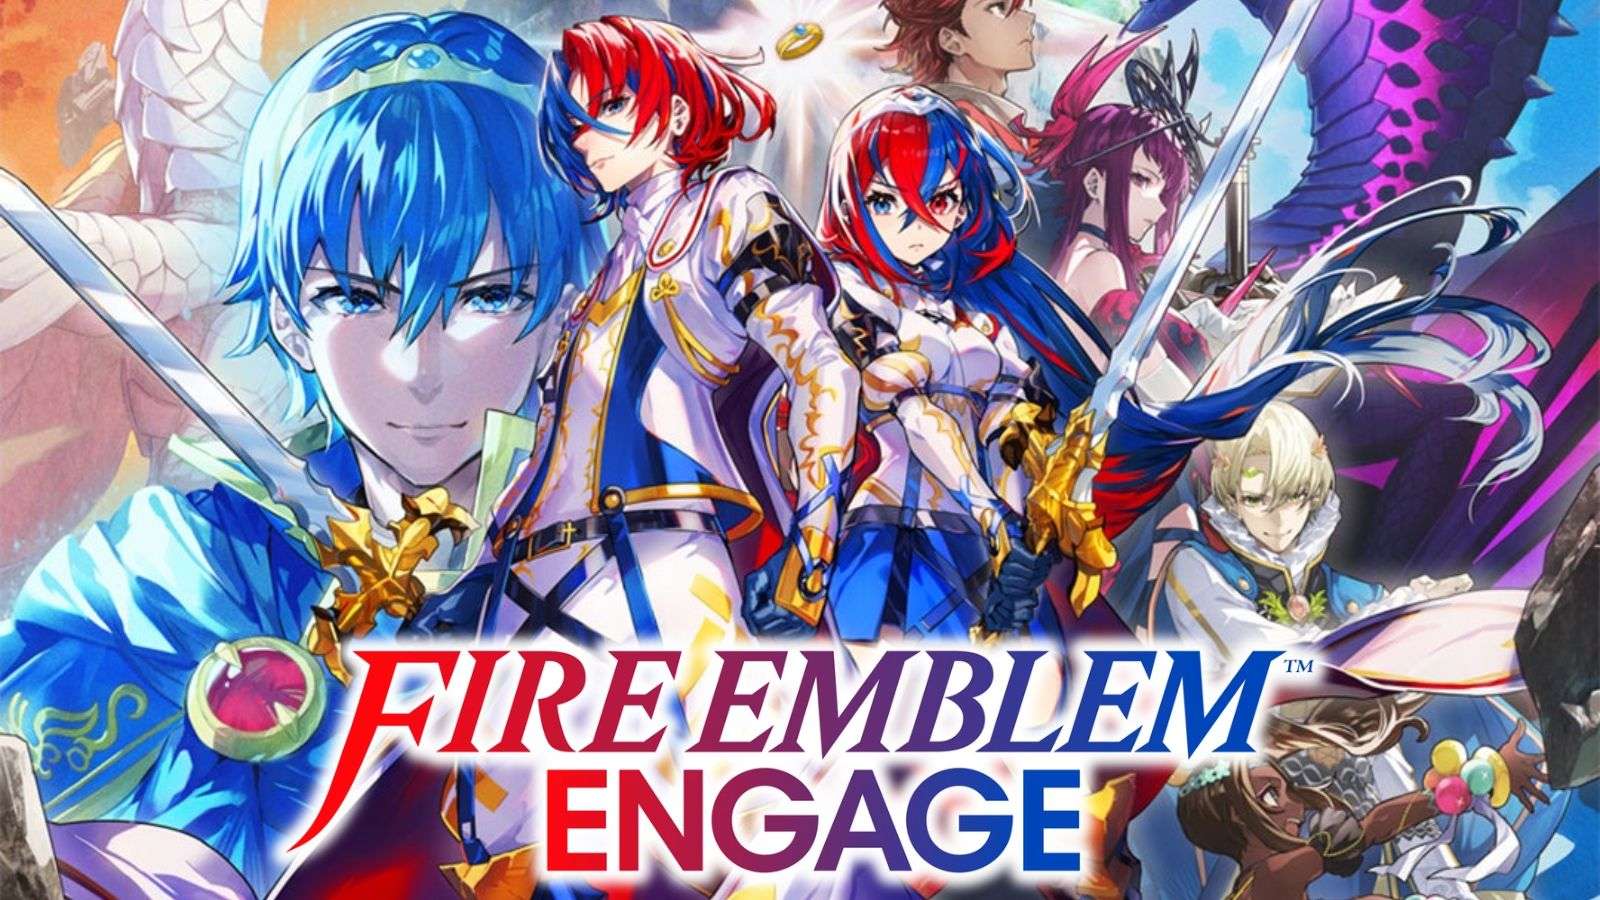 Fire emblem engage co-op or multiplayer